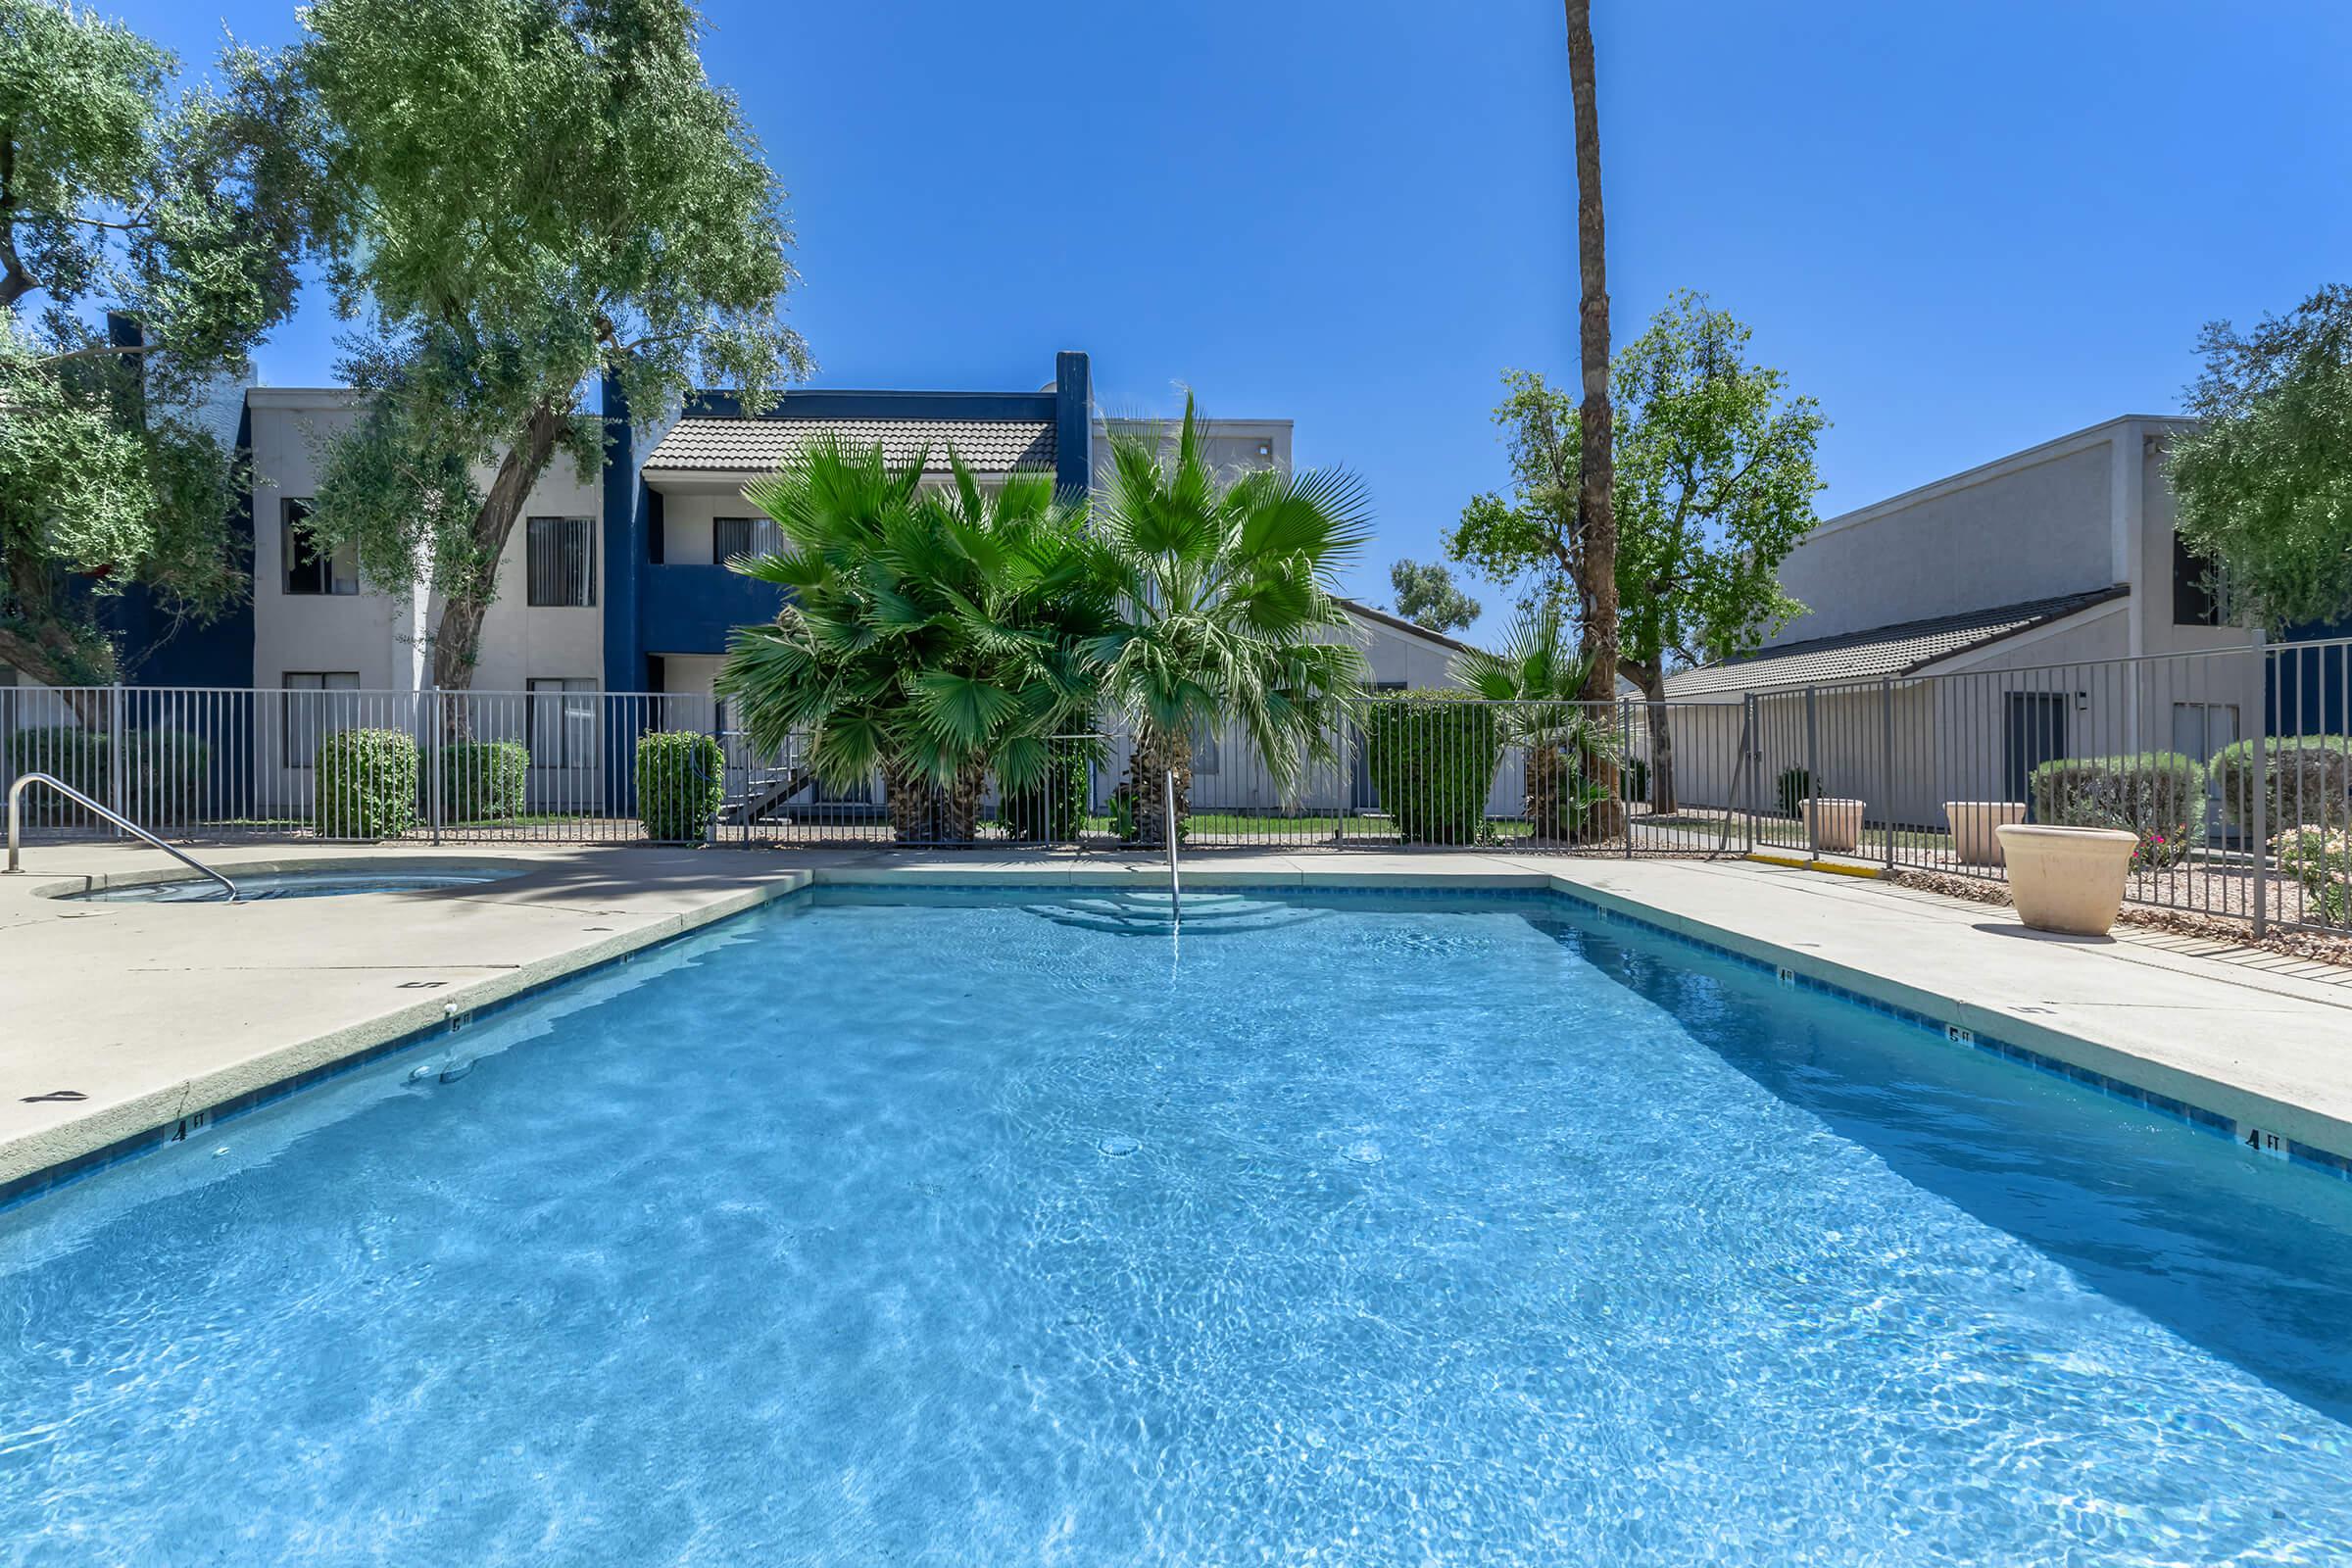 Large blue sparkling outdoor pool at Rise Camelback